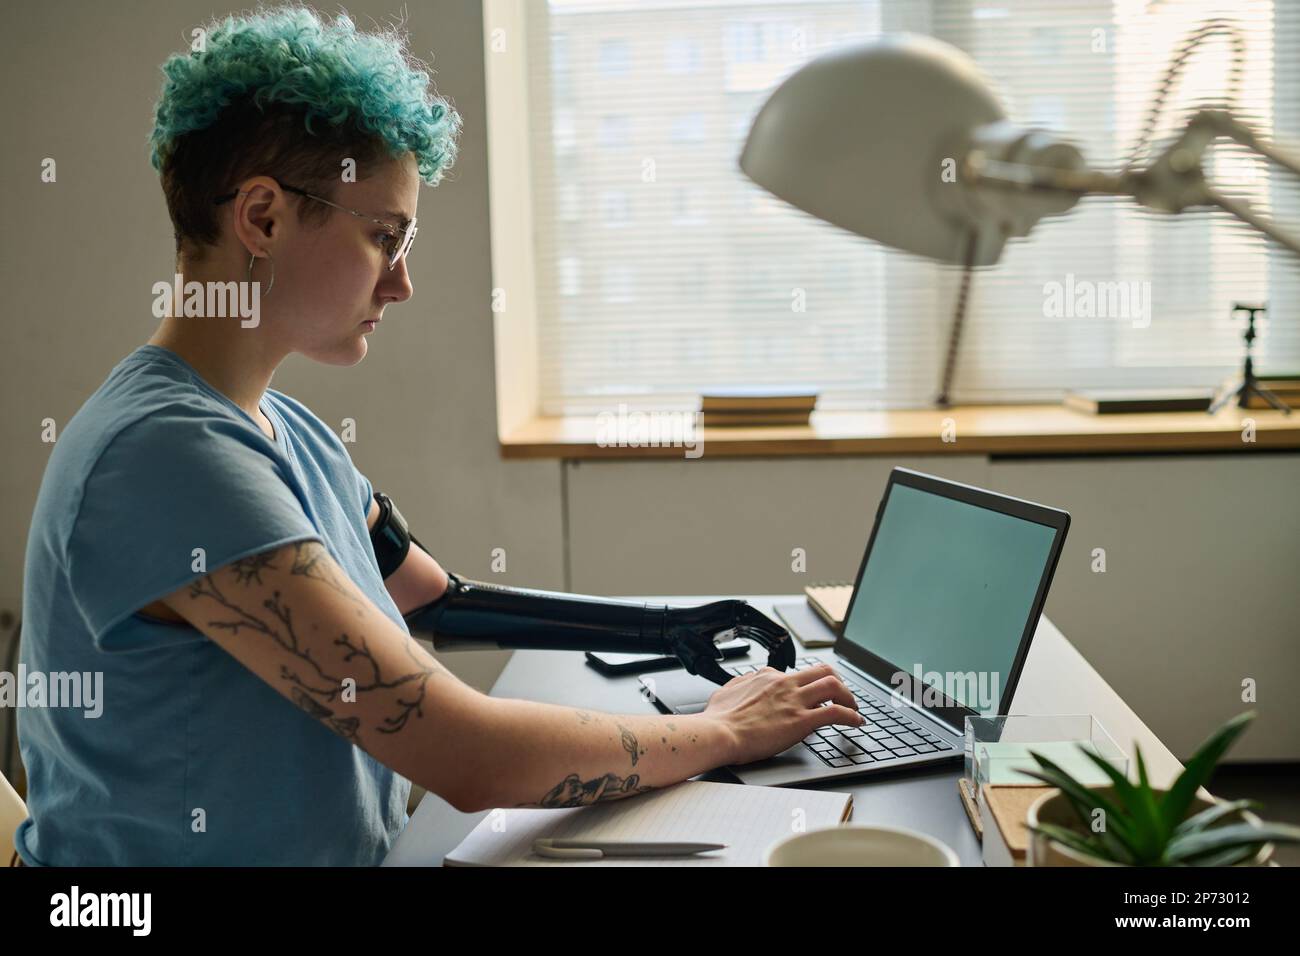 Young woman with prosthetic arm typing on laptop and working online at table in the room Stock Photo